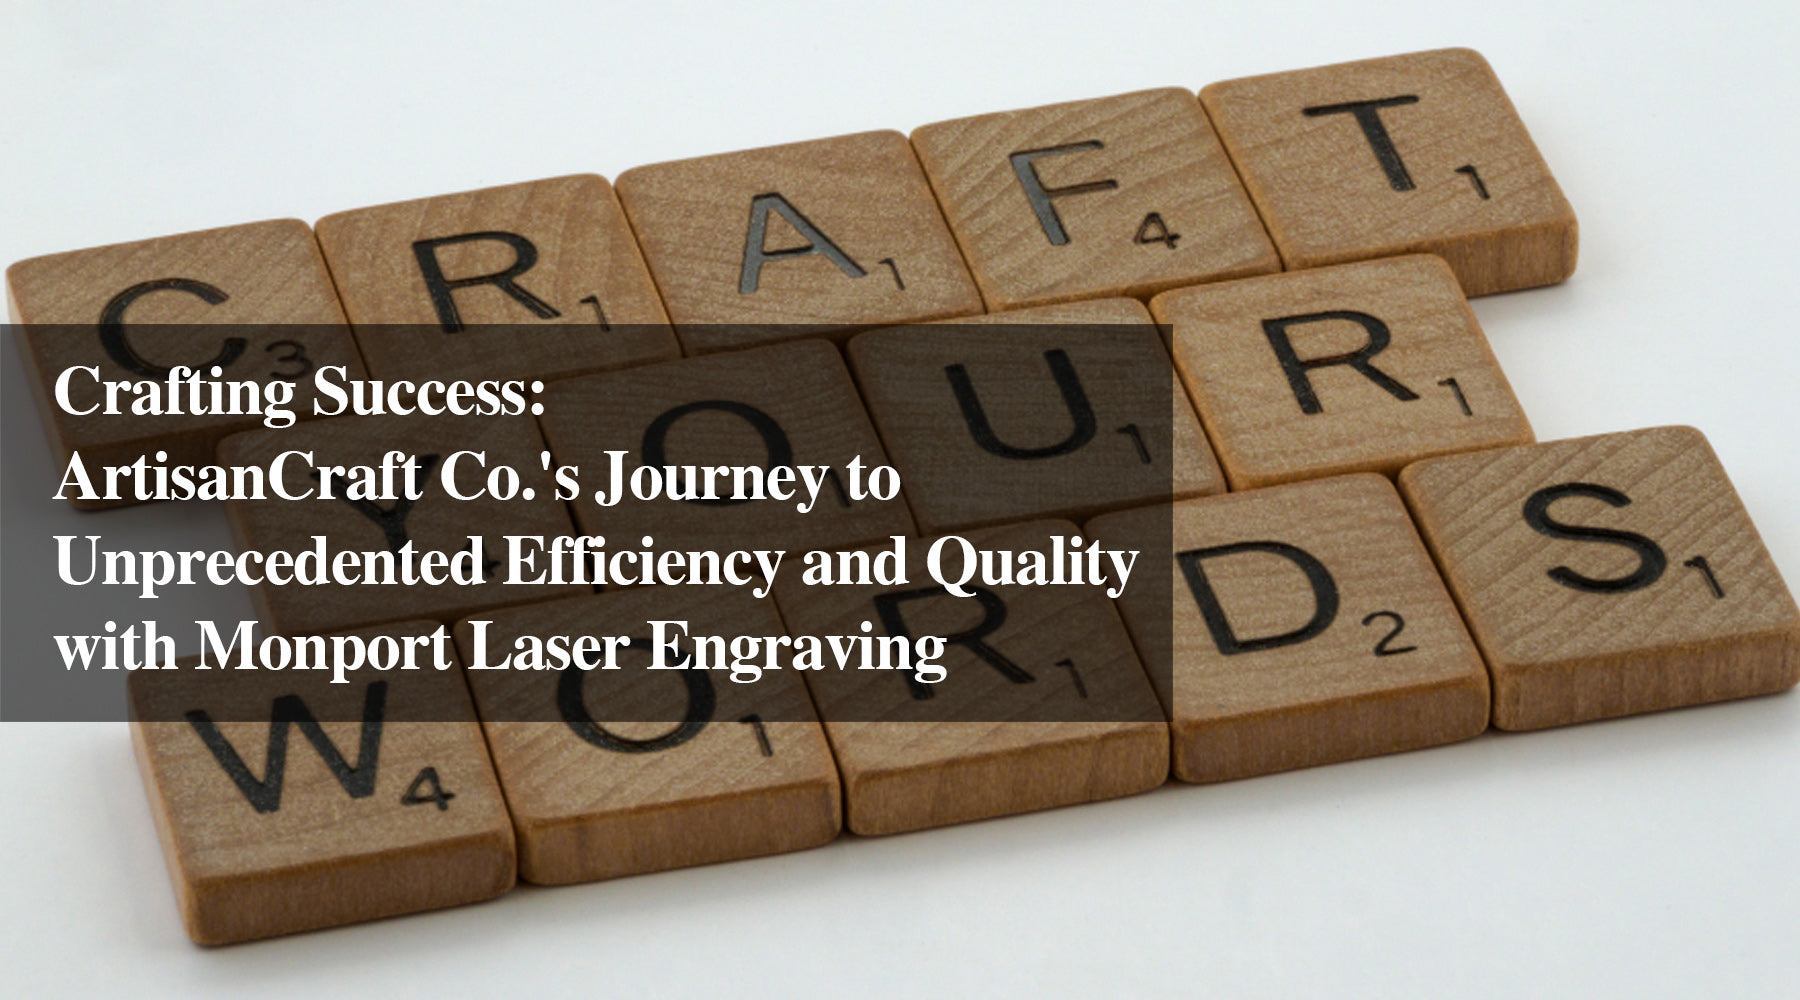 Crafting Success: ArtisanCraft Co.'s Journey to Unprecedented Efficiency and Quality with Monport Laser Engraving